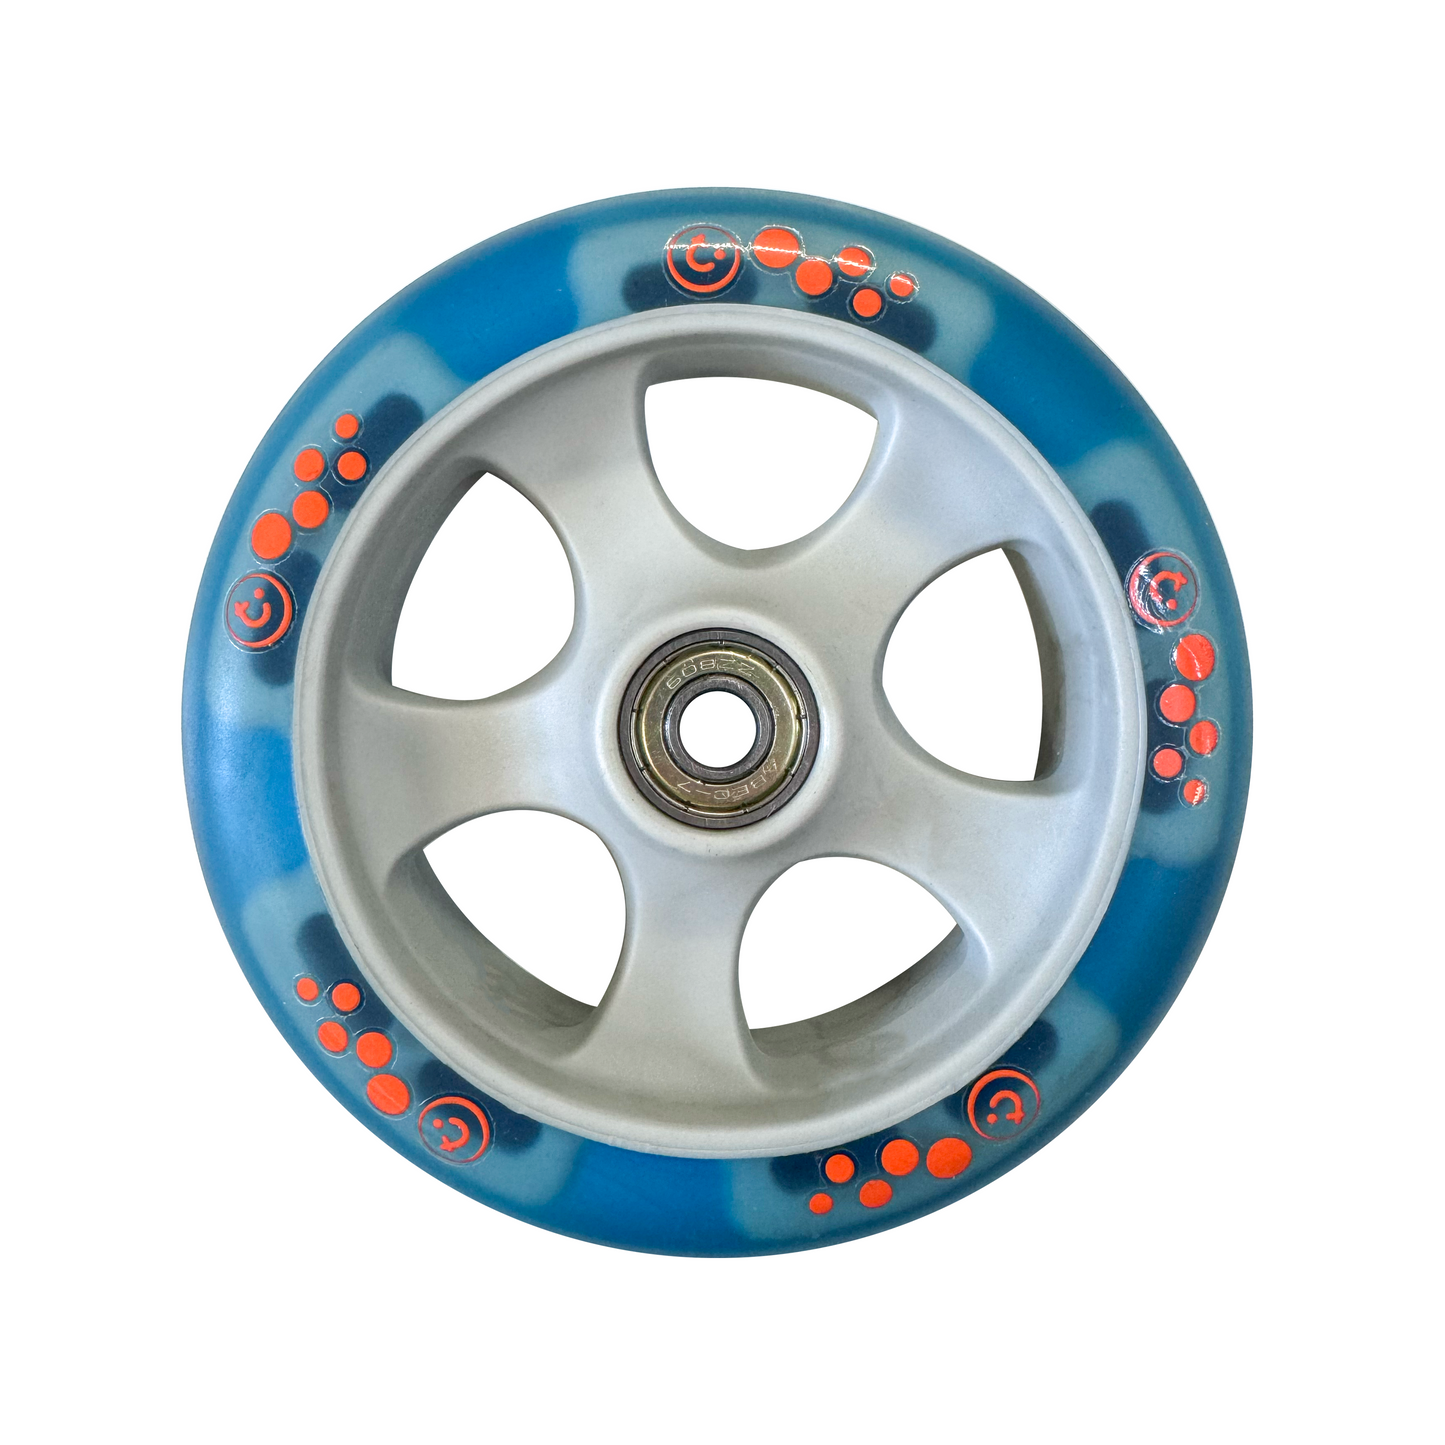 Replacement-Wheel-Front-Large-Blue-Trunki-Scooter-image1